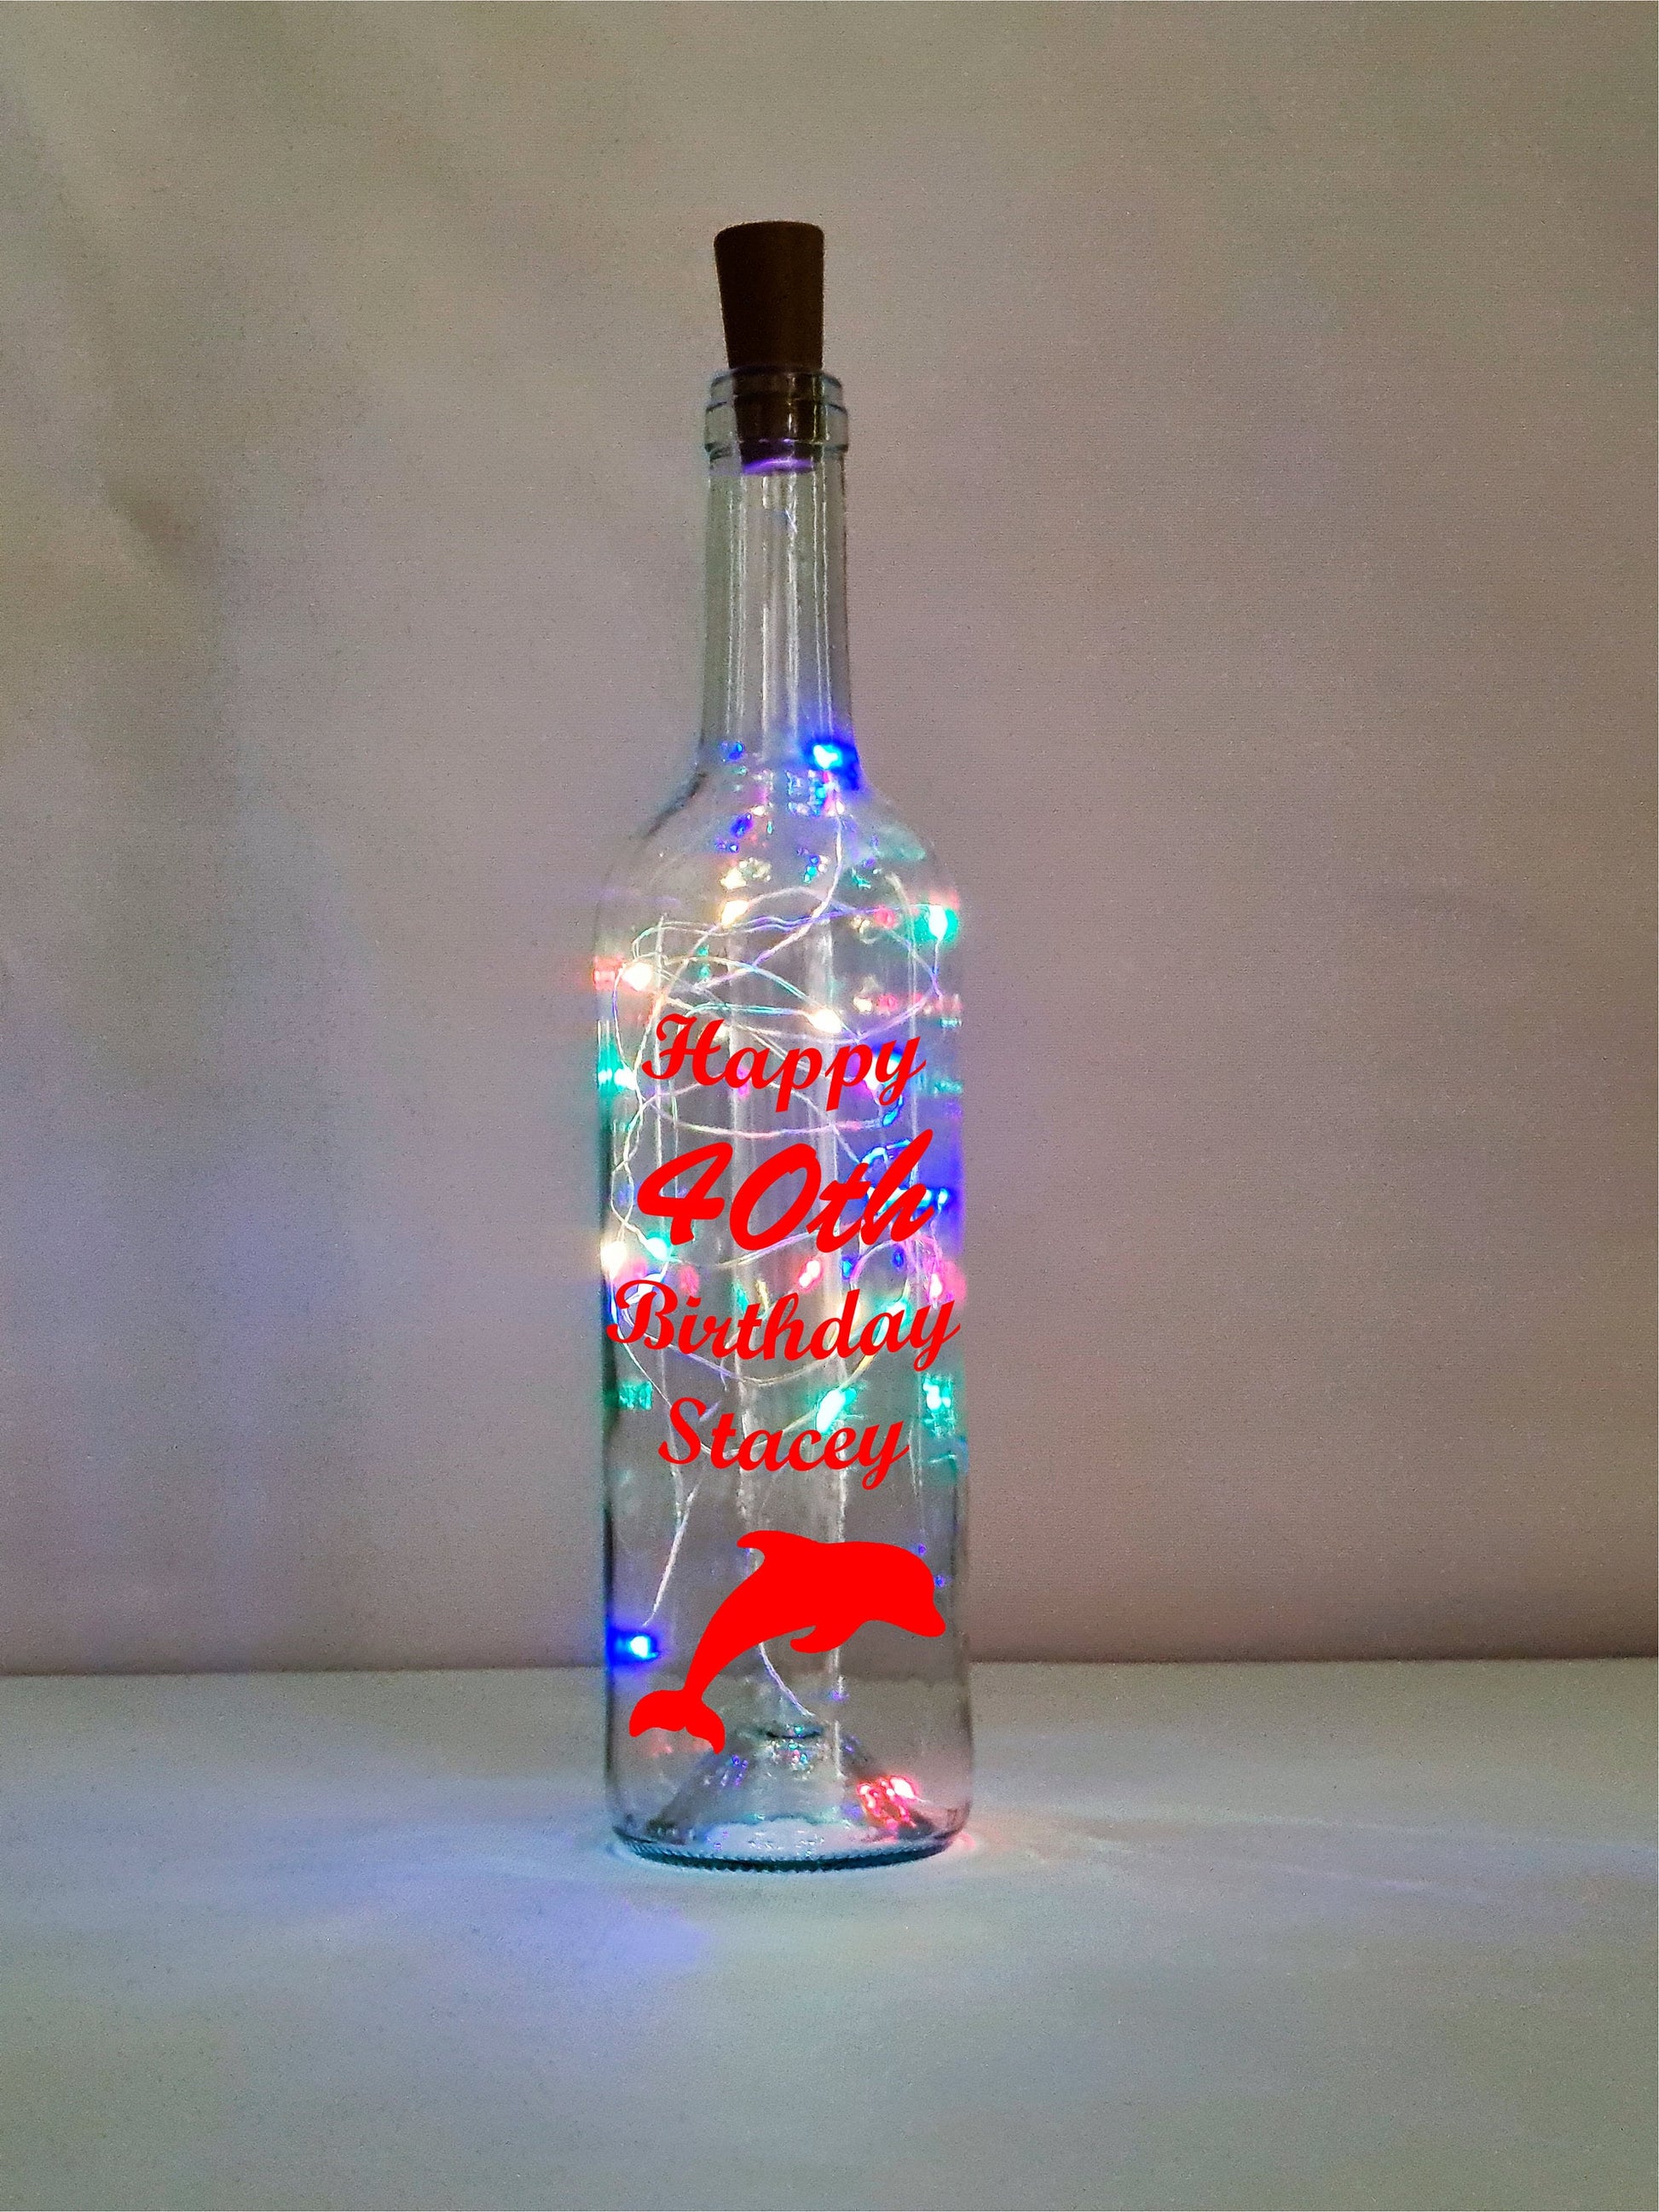 Personalised 40th Dolphin Birthday Gift, Light Up Wine Bottle, Gift For Her, Gift For Him, Mum, Wife Present, White Lights, Pink, Blue